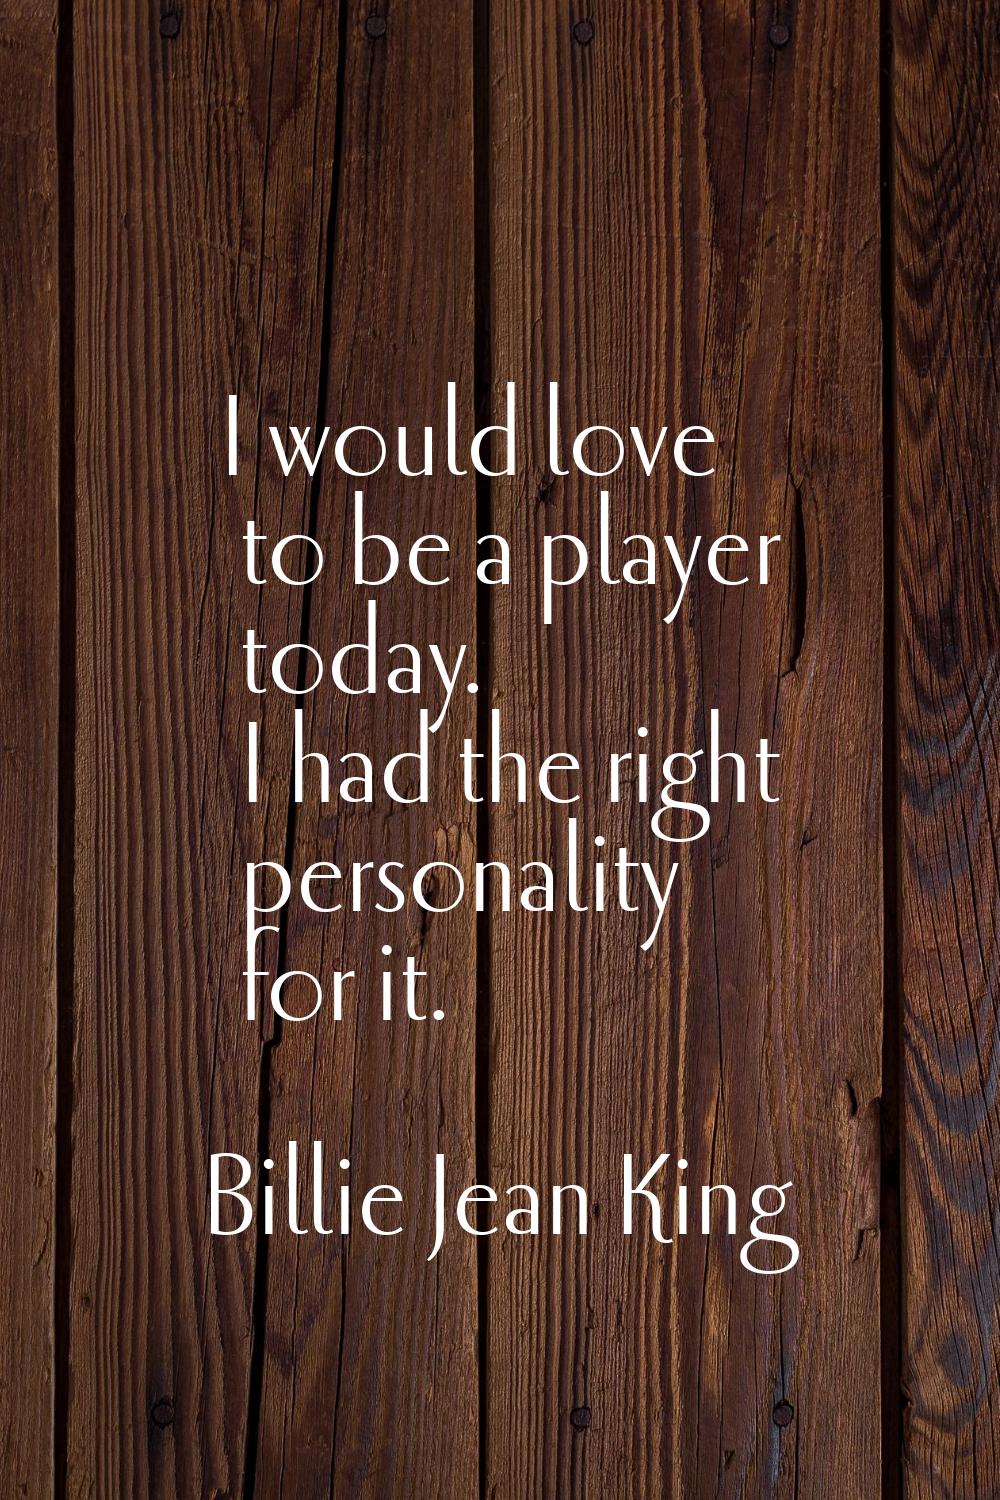 I would love to be a player today. I had the right personality for it.